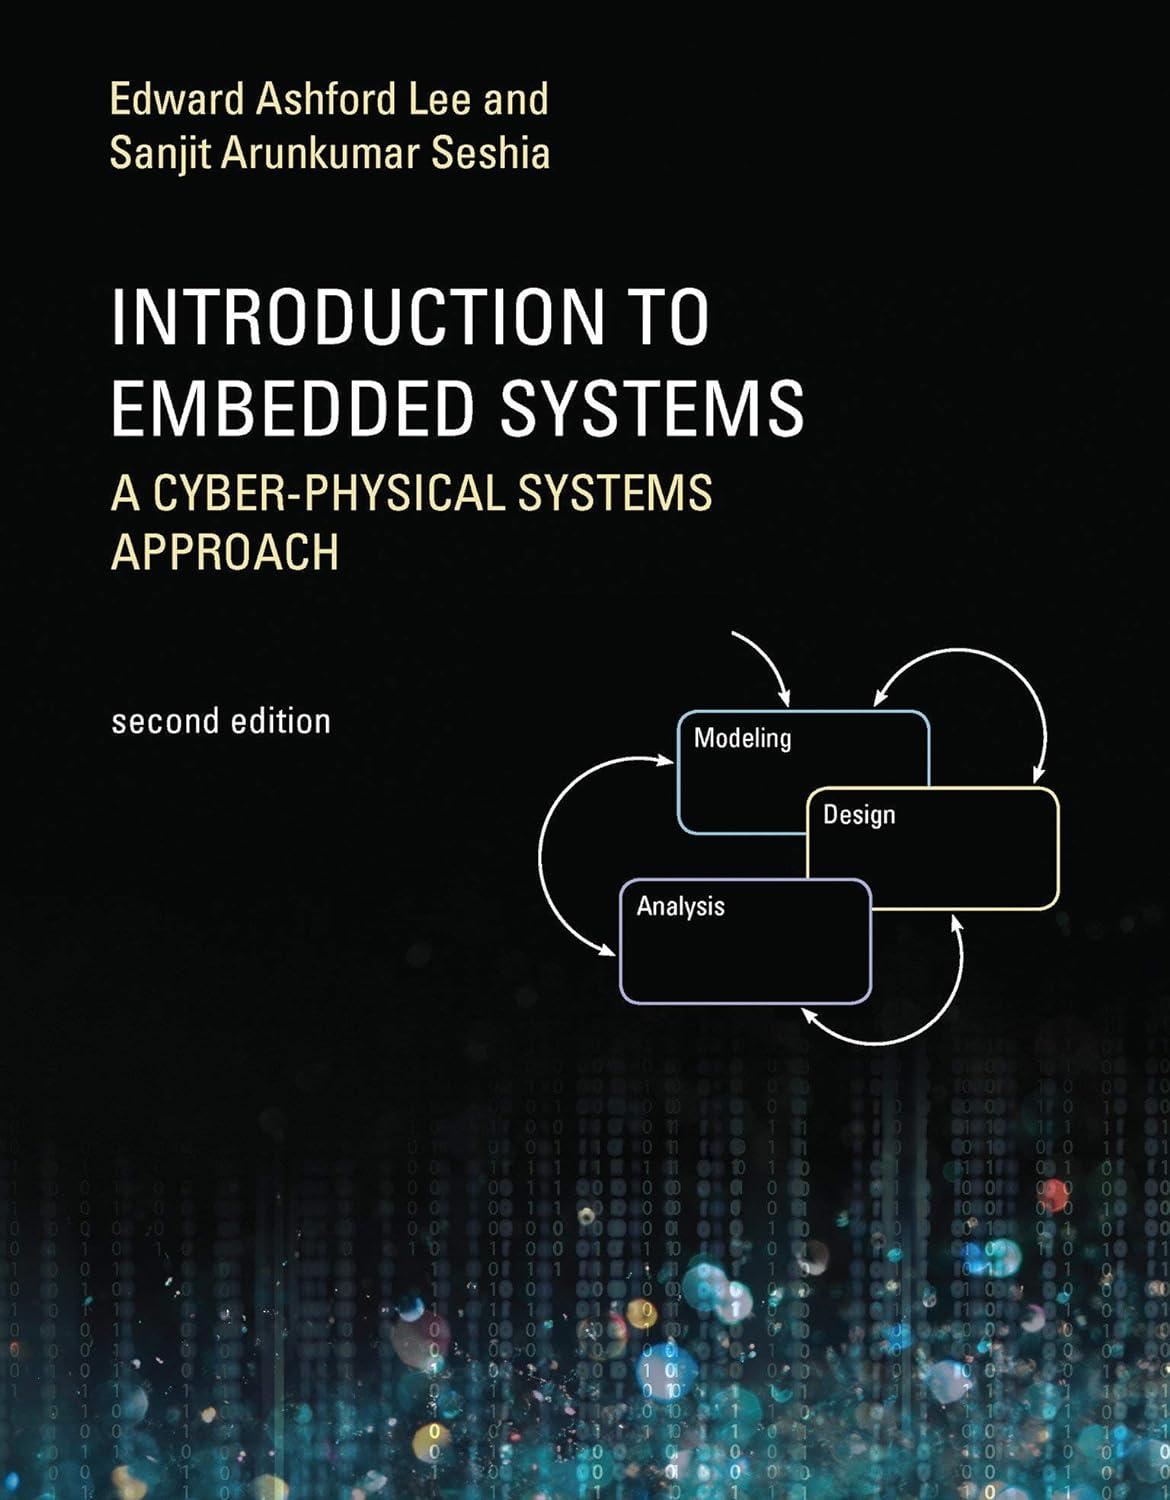 introduction to embedded systems second edition a cyber physical systems approach 2nd edition edward ashford